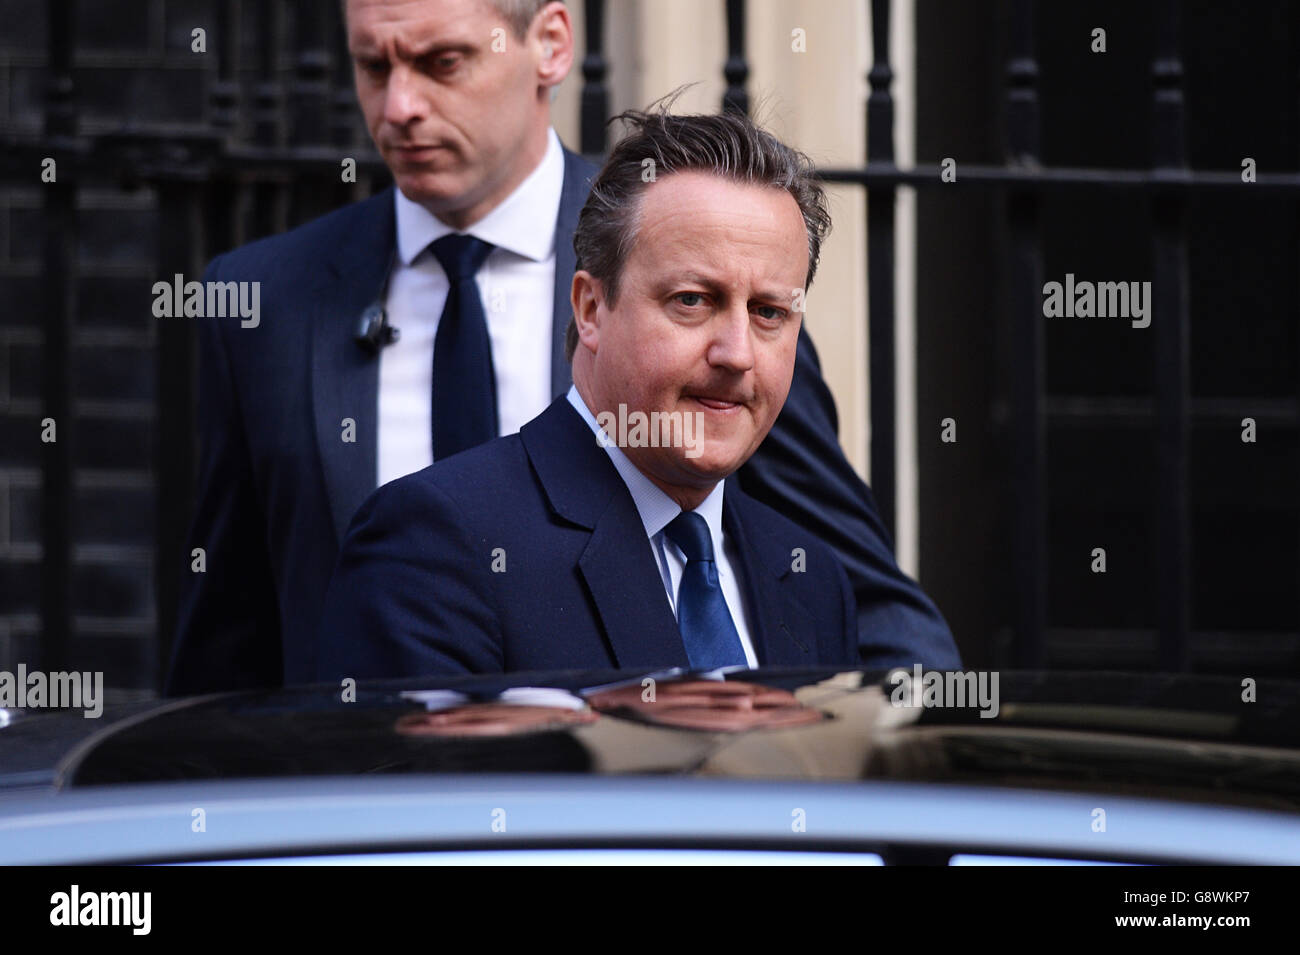 Prime Minister David Cameron leaves 10 Downing Street in London for the House of Commons to face Prime Minister's Questions. Stock Photo